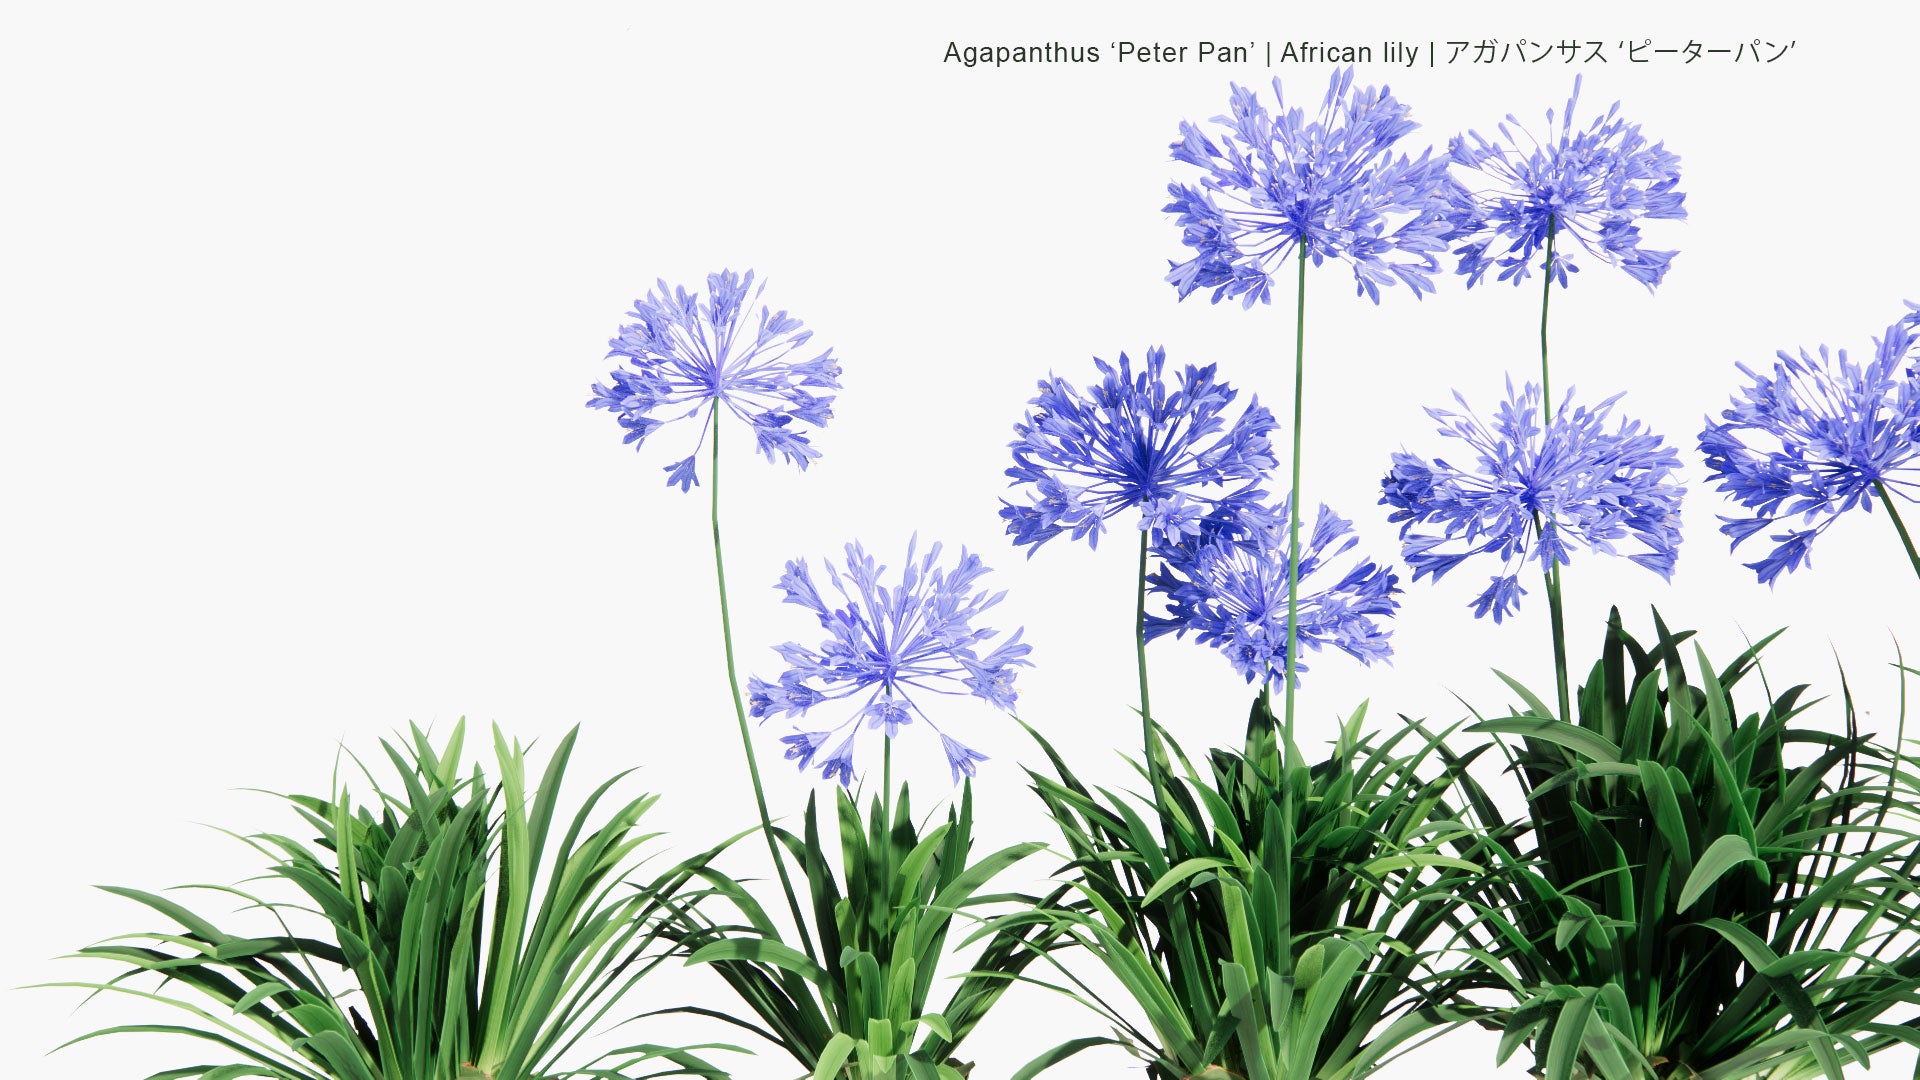 Low Poly Agapanthus Peter Pan - African lily , アガパンサス ‘ピーターパン’ (3D Model)